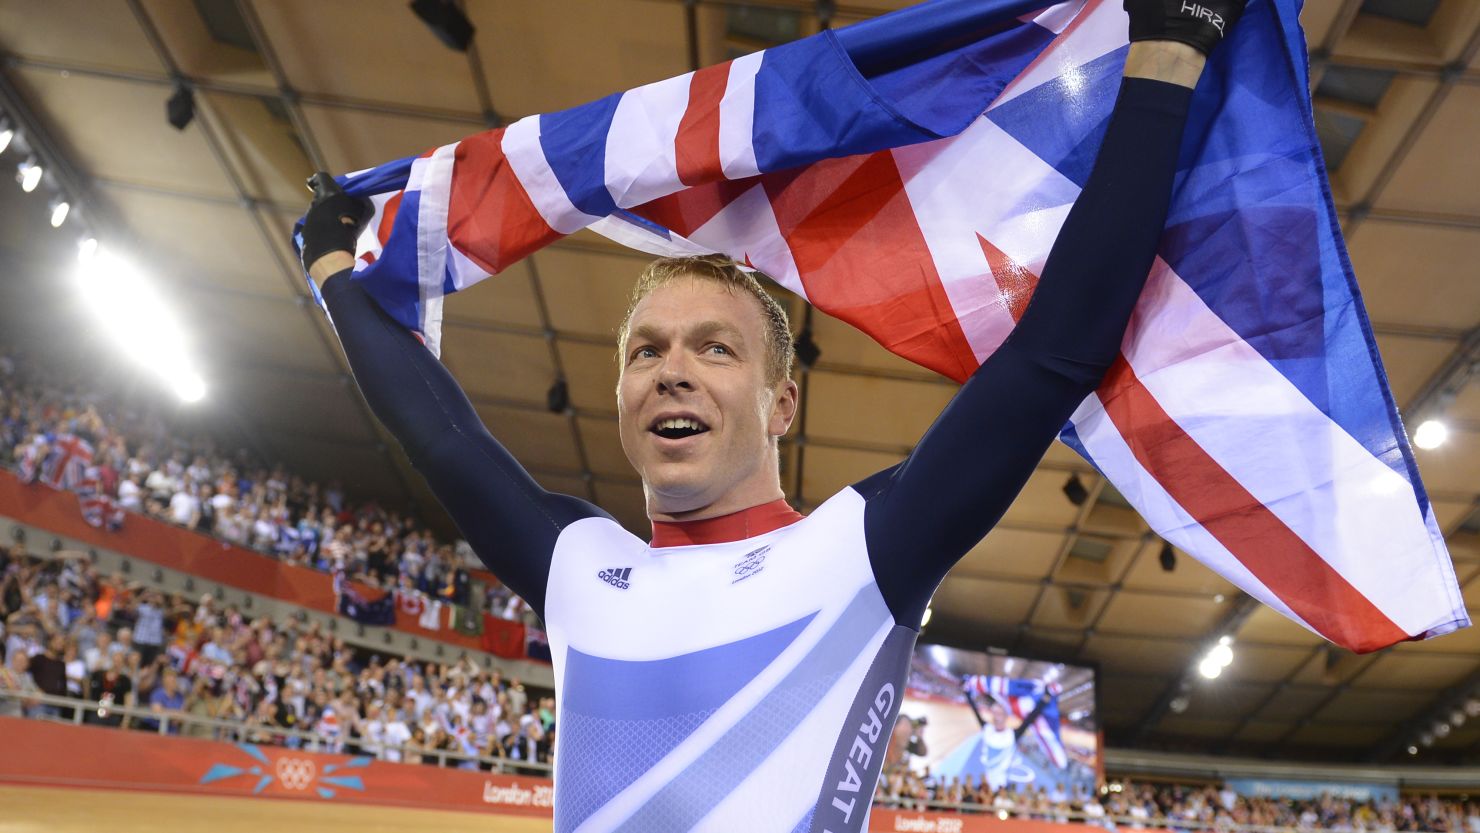 Chris Hoy poses with the Union Jack after becoming the most decorated Olympian in British history